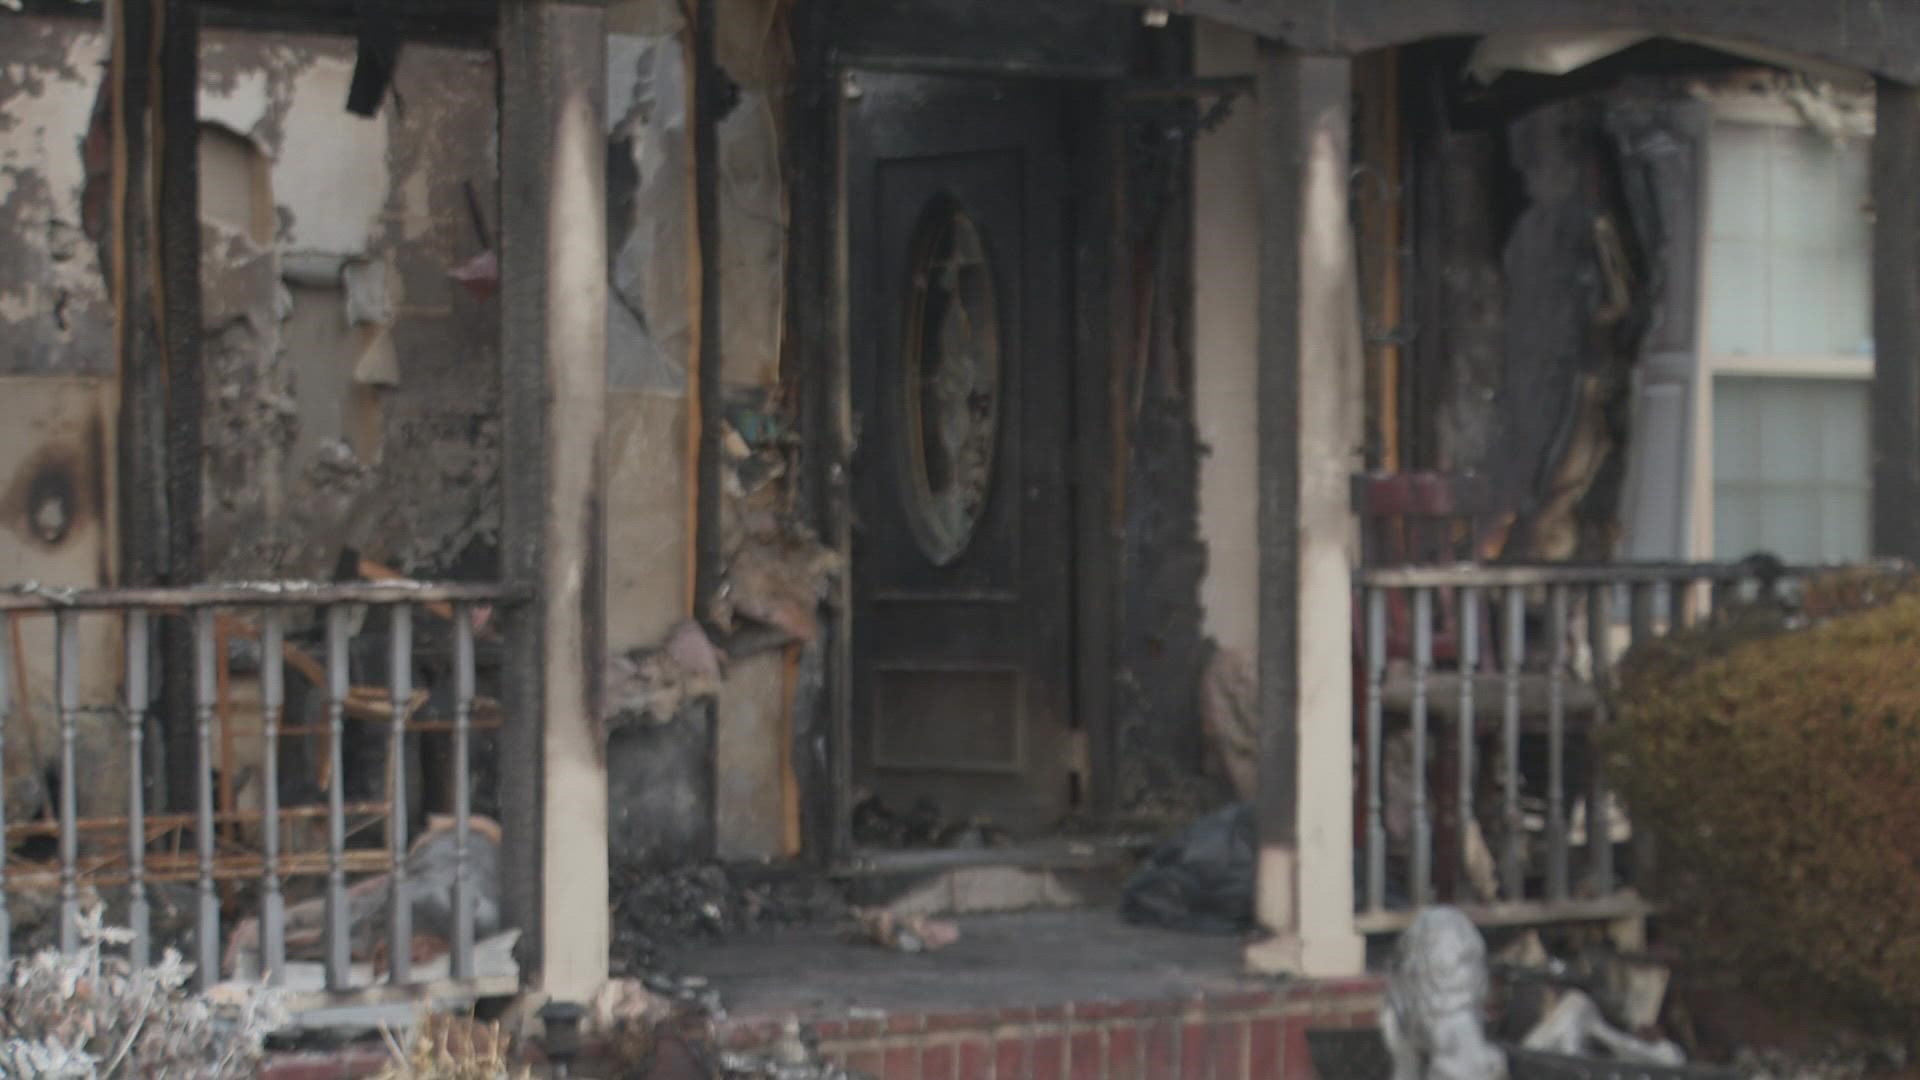 A family who has given back to the community find themselves without their home after a recent fire. Much was lost, but a precious symbol made it through the debris.